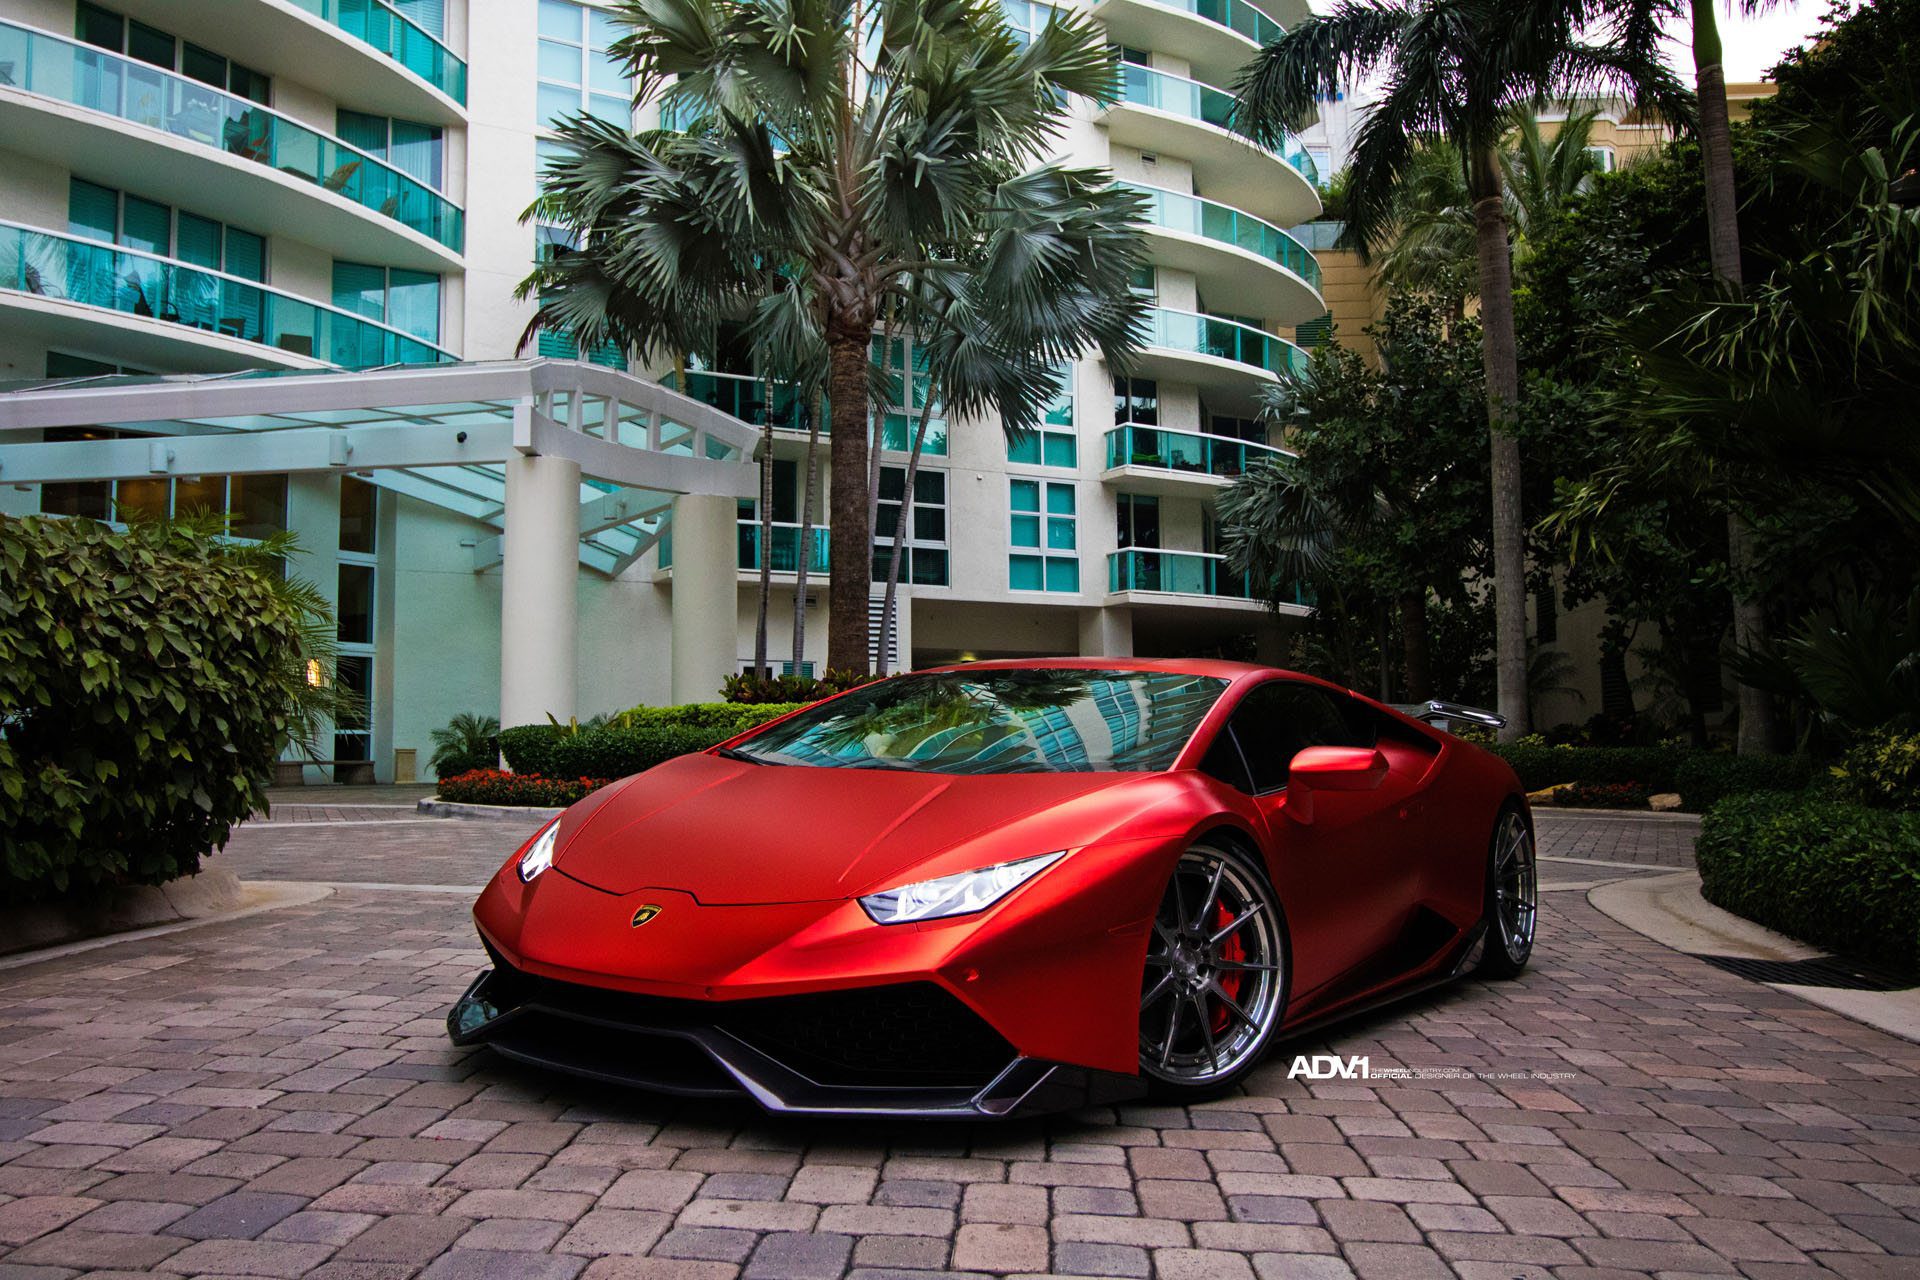 Matte Red Lamborghini Huracán With 1016 Industries Kit And ADV.1 Wheels